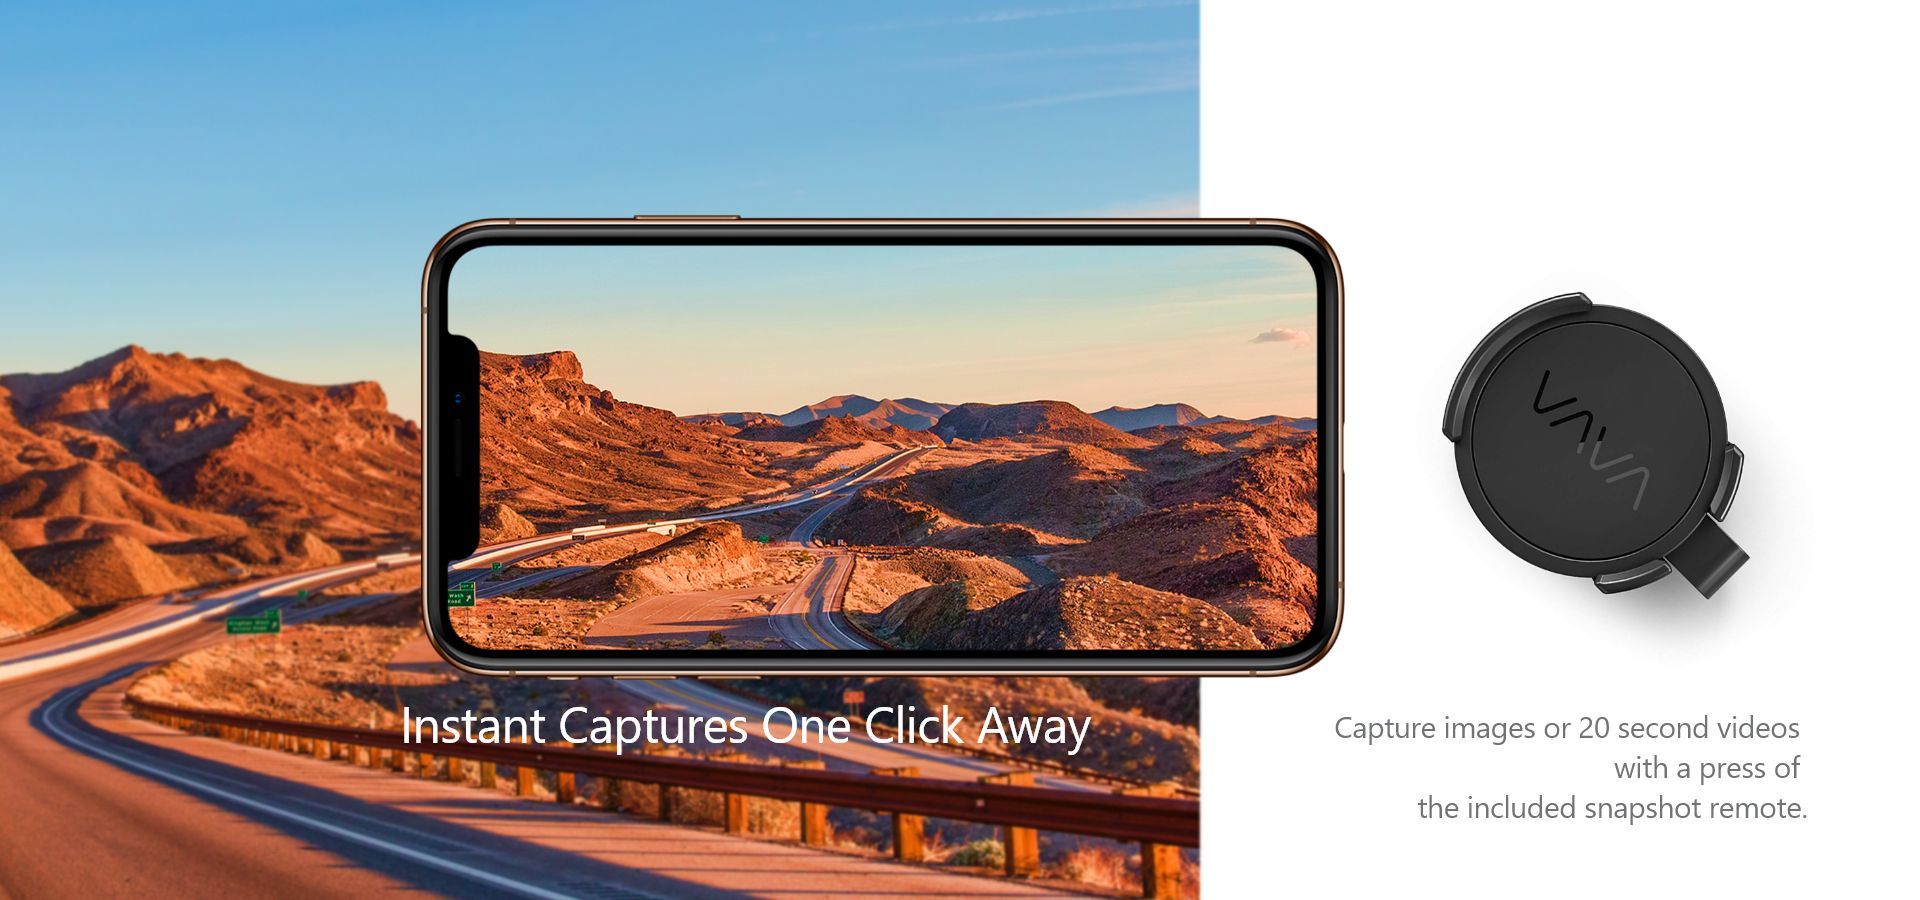 Snapshot remote and smartphone taking a picture of a red canyon and desert